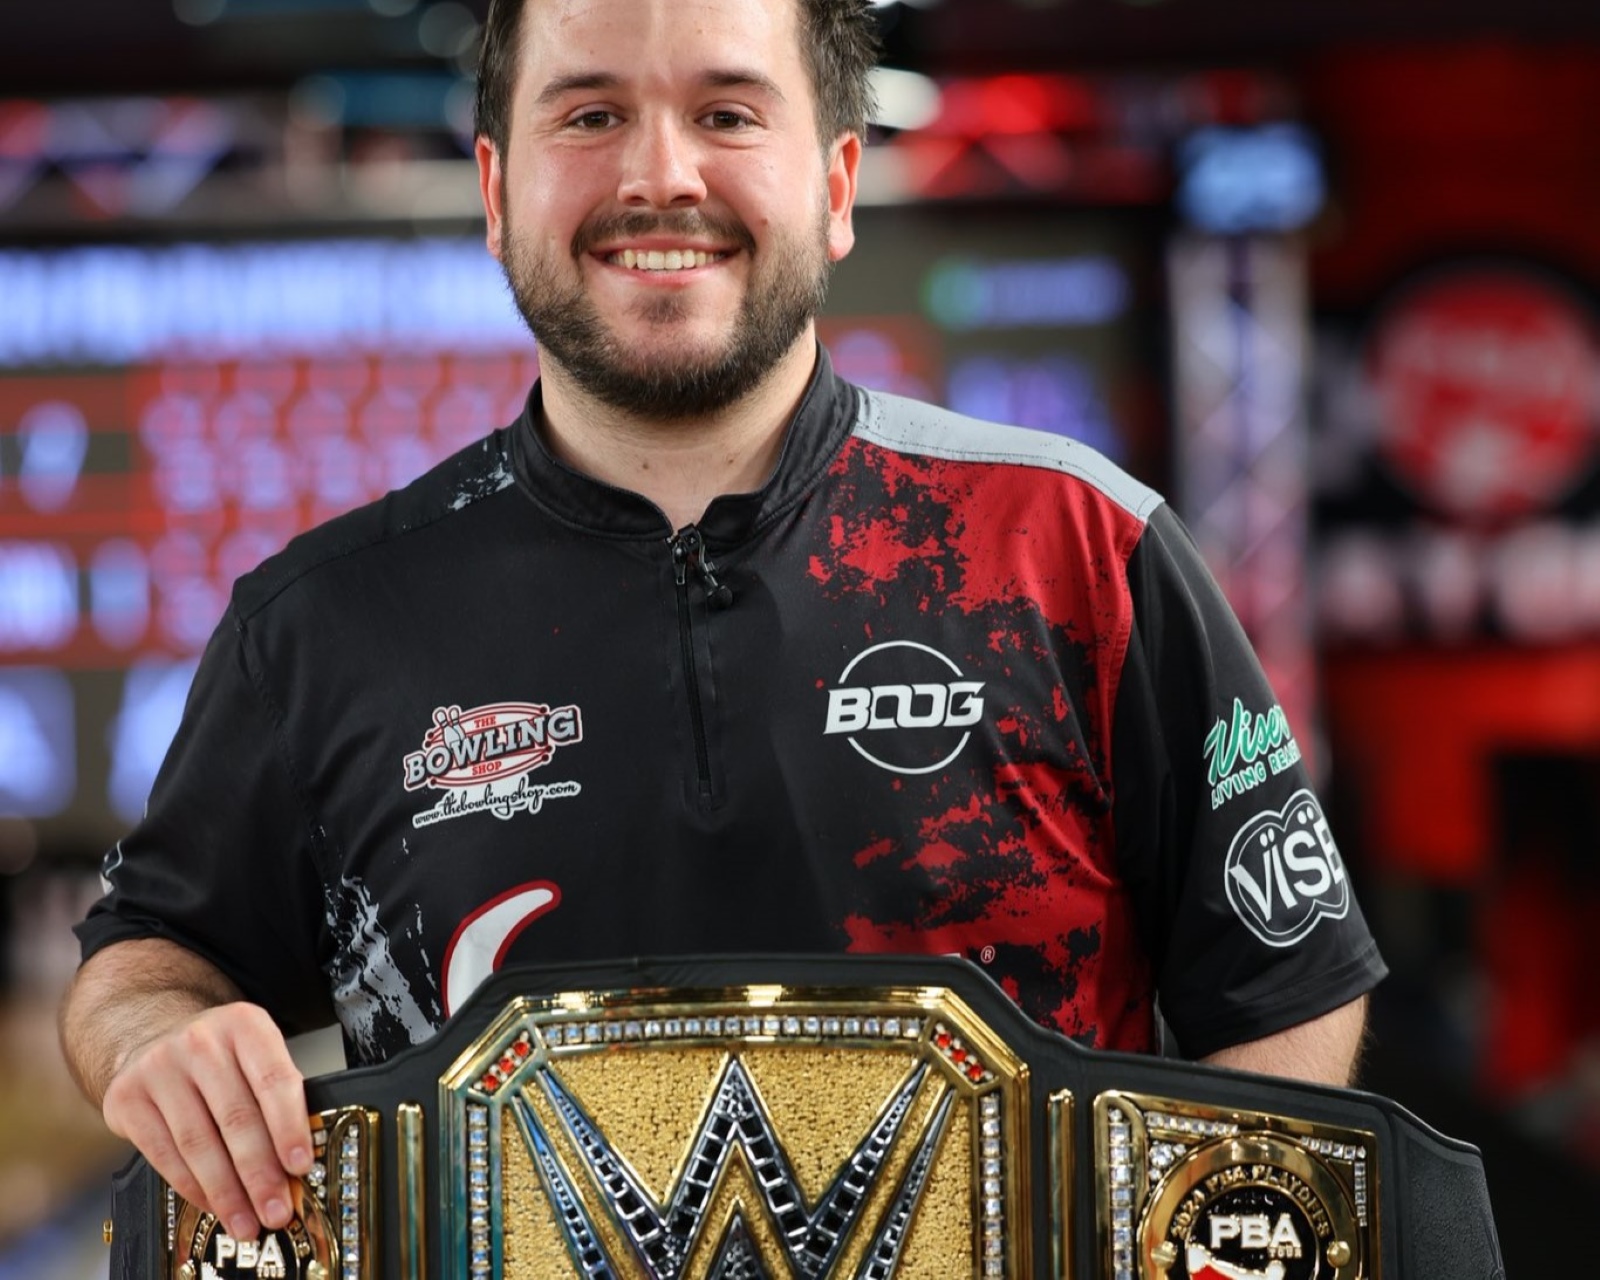 David “Boog” Krol holds the PBA Playoffs championship belt after his $75,000 victory on March 19 in Kissimmee, Florida. (Photo by PBA Tour)